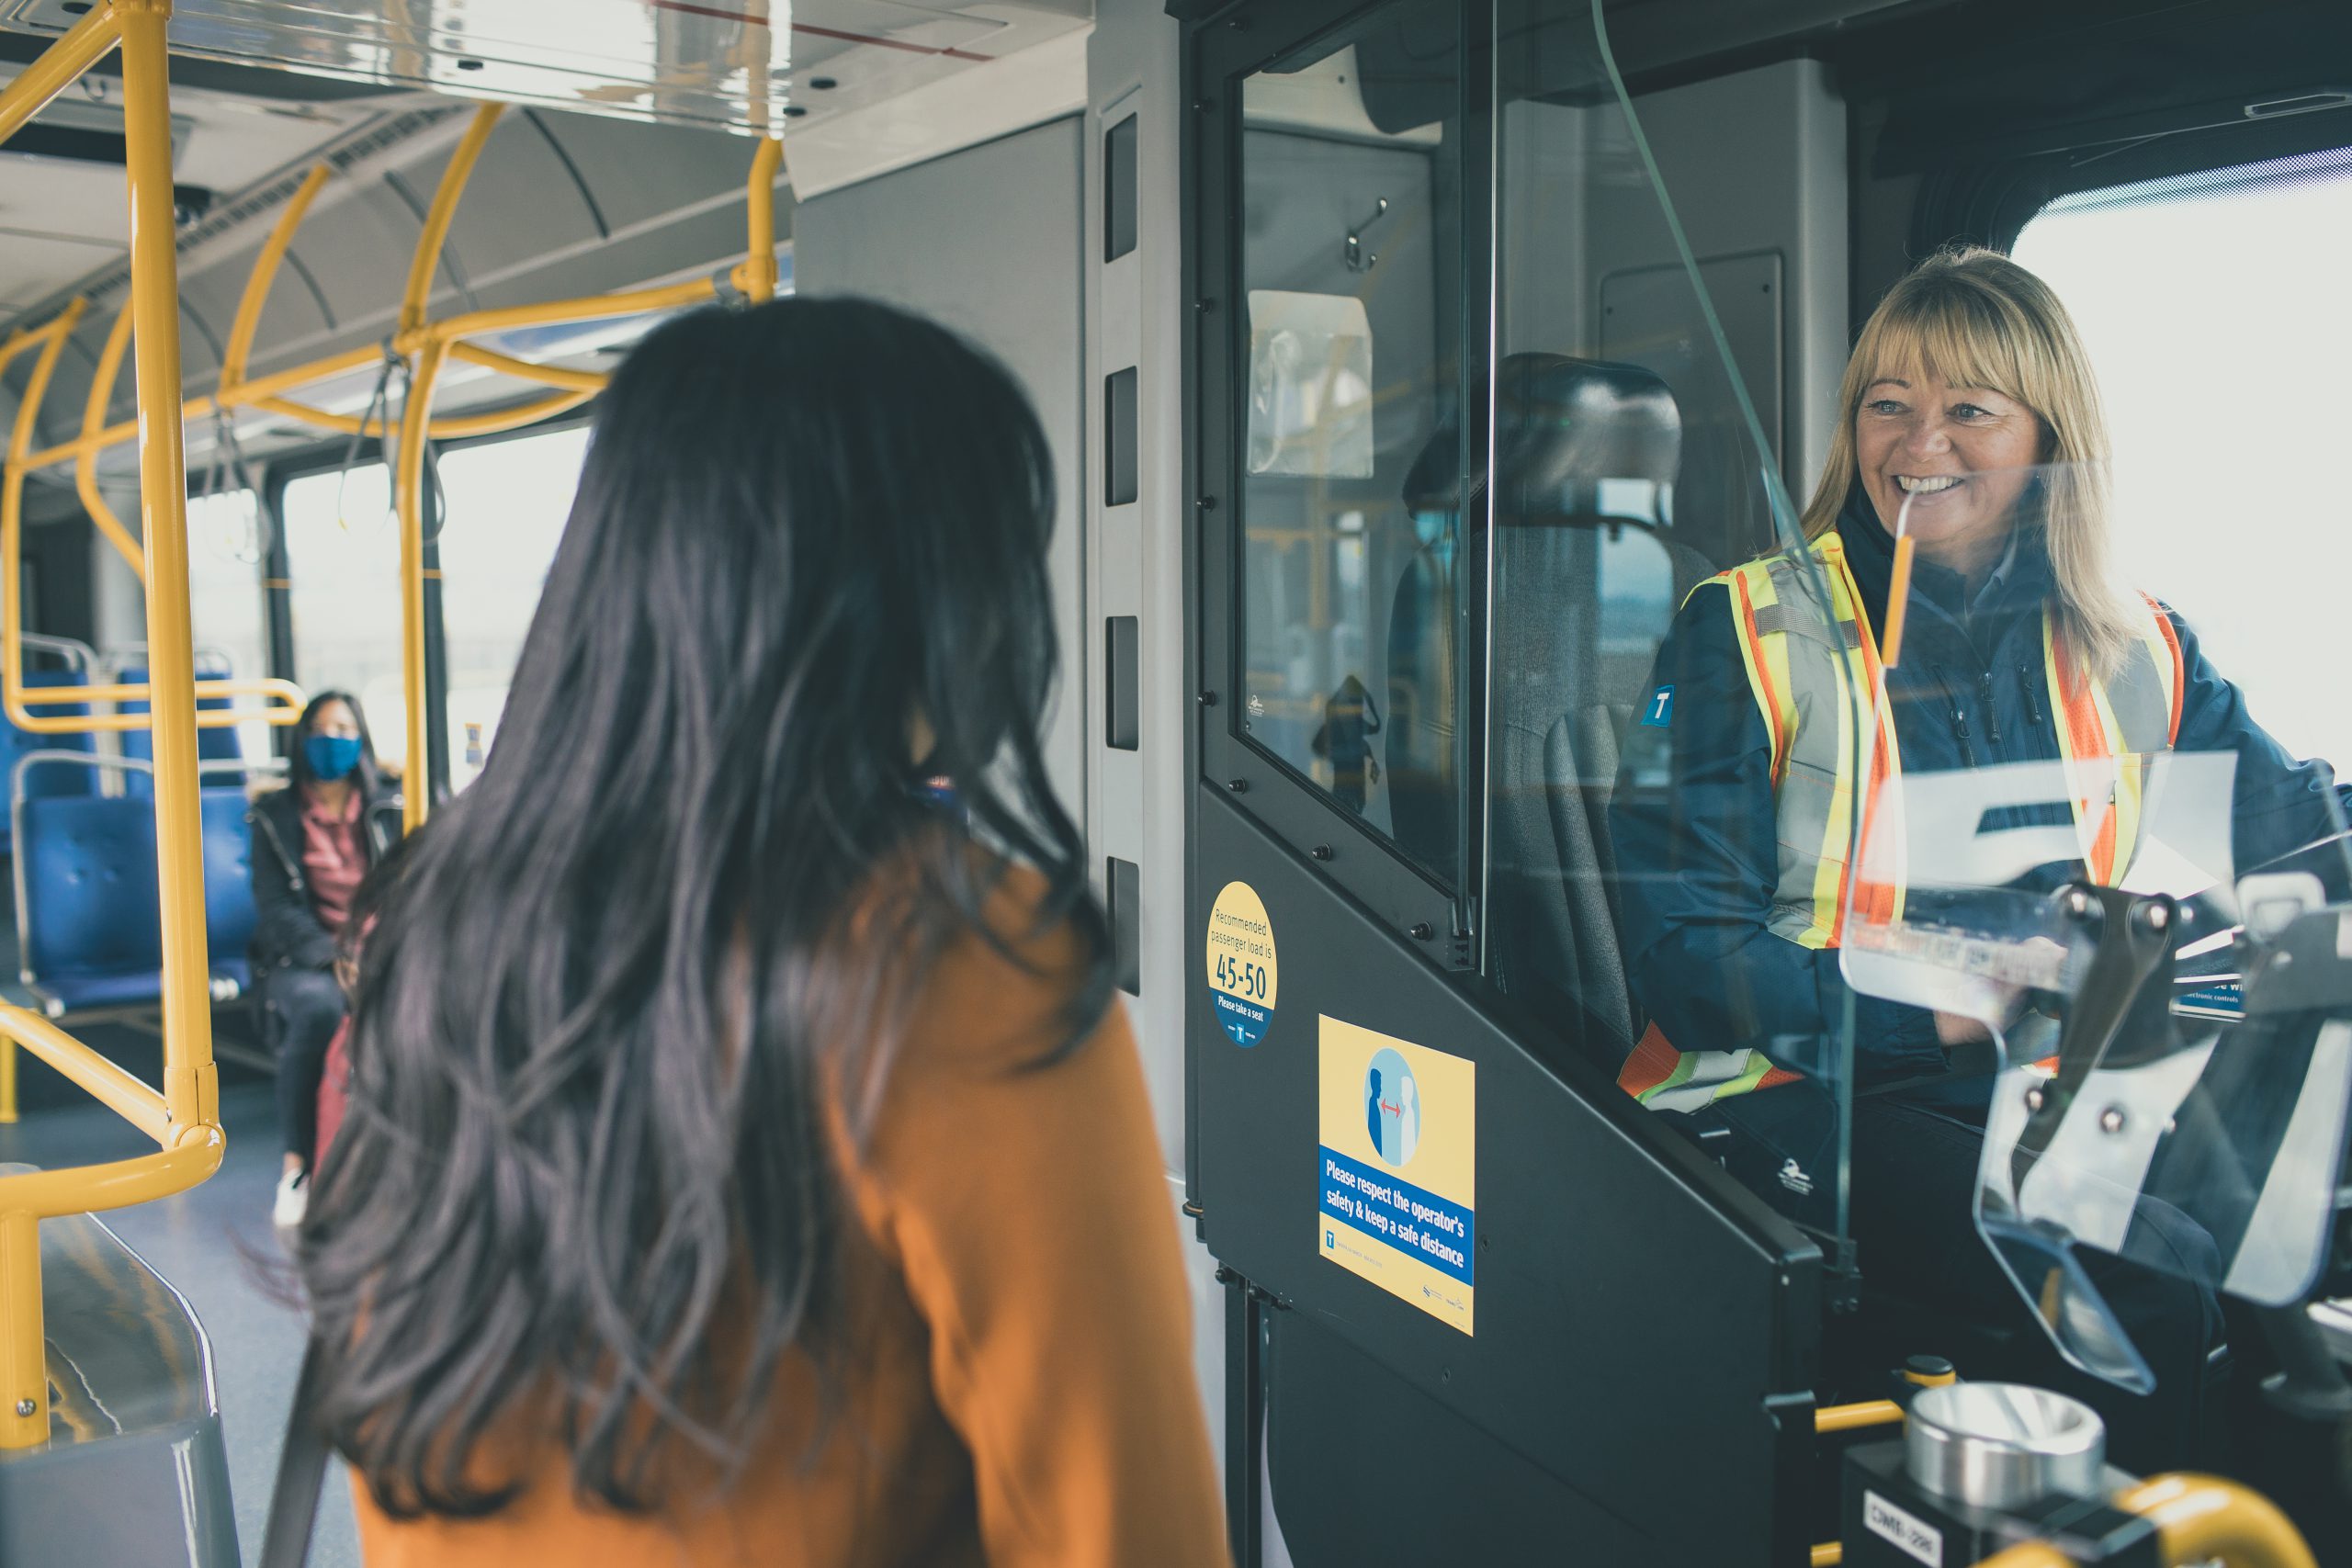 image of a woman getting on a bus with a bus operator smiling at her